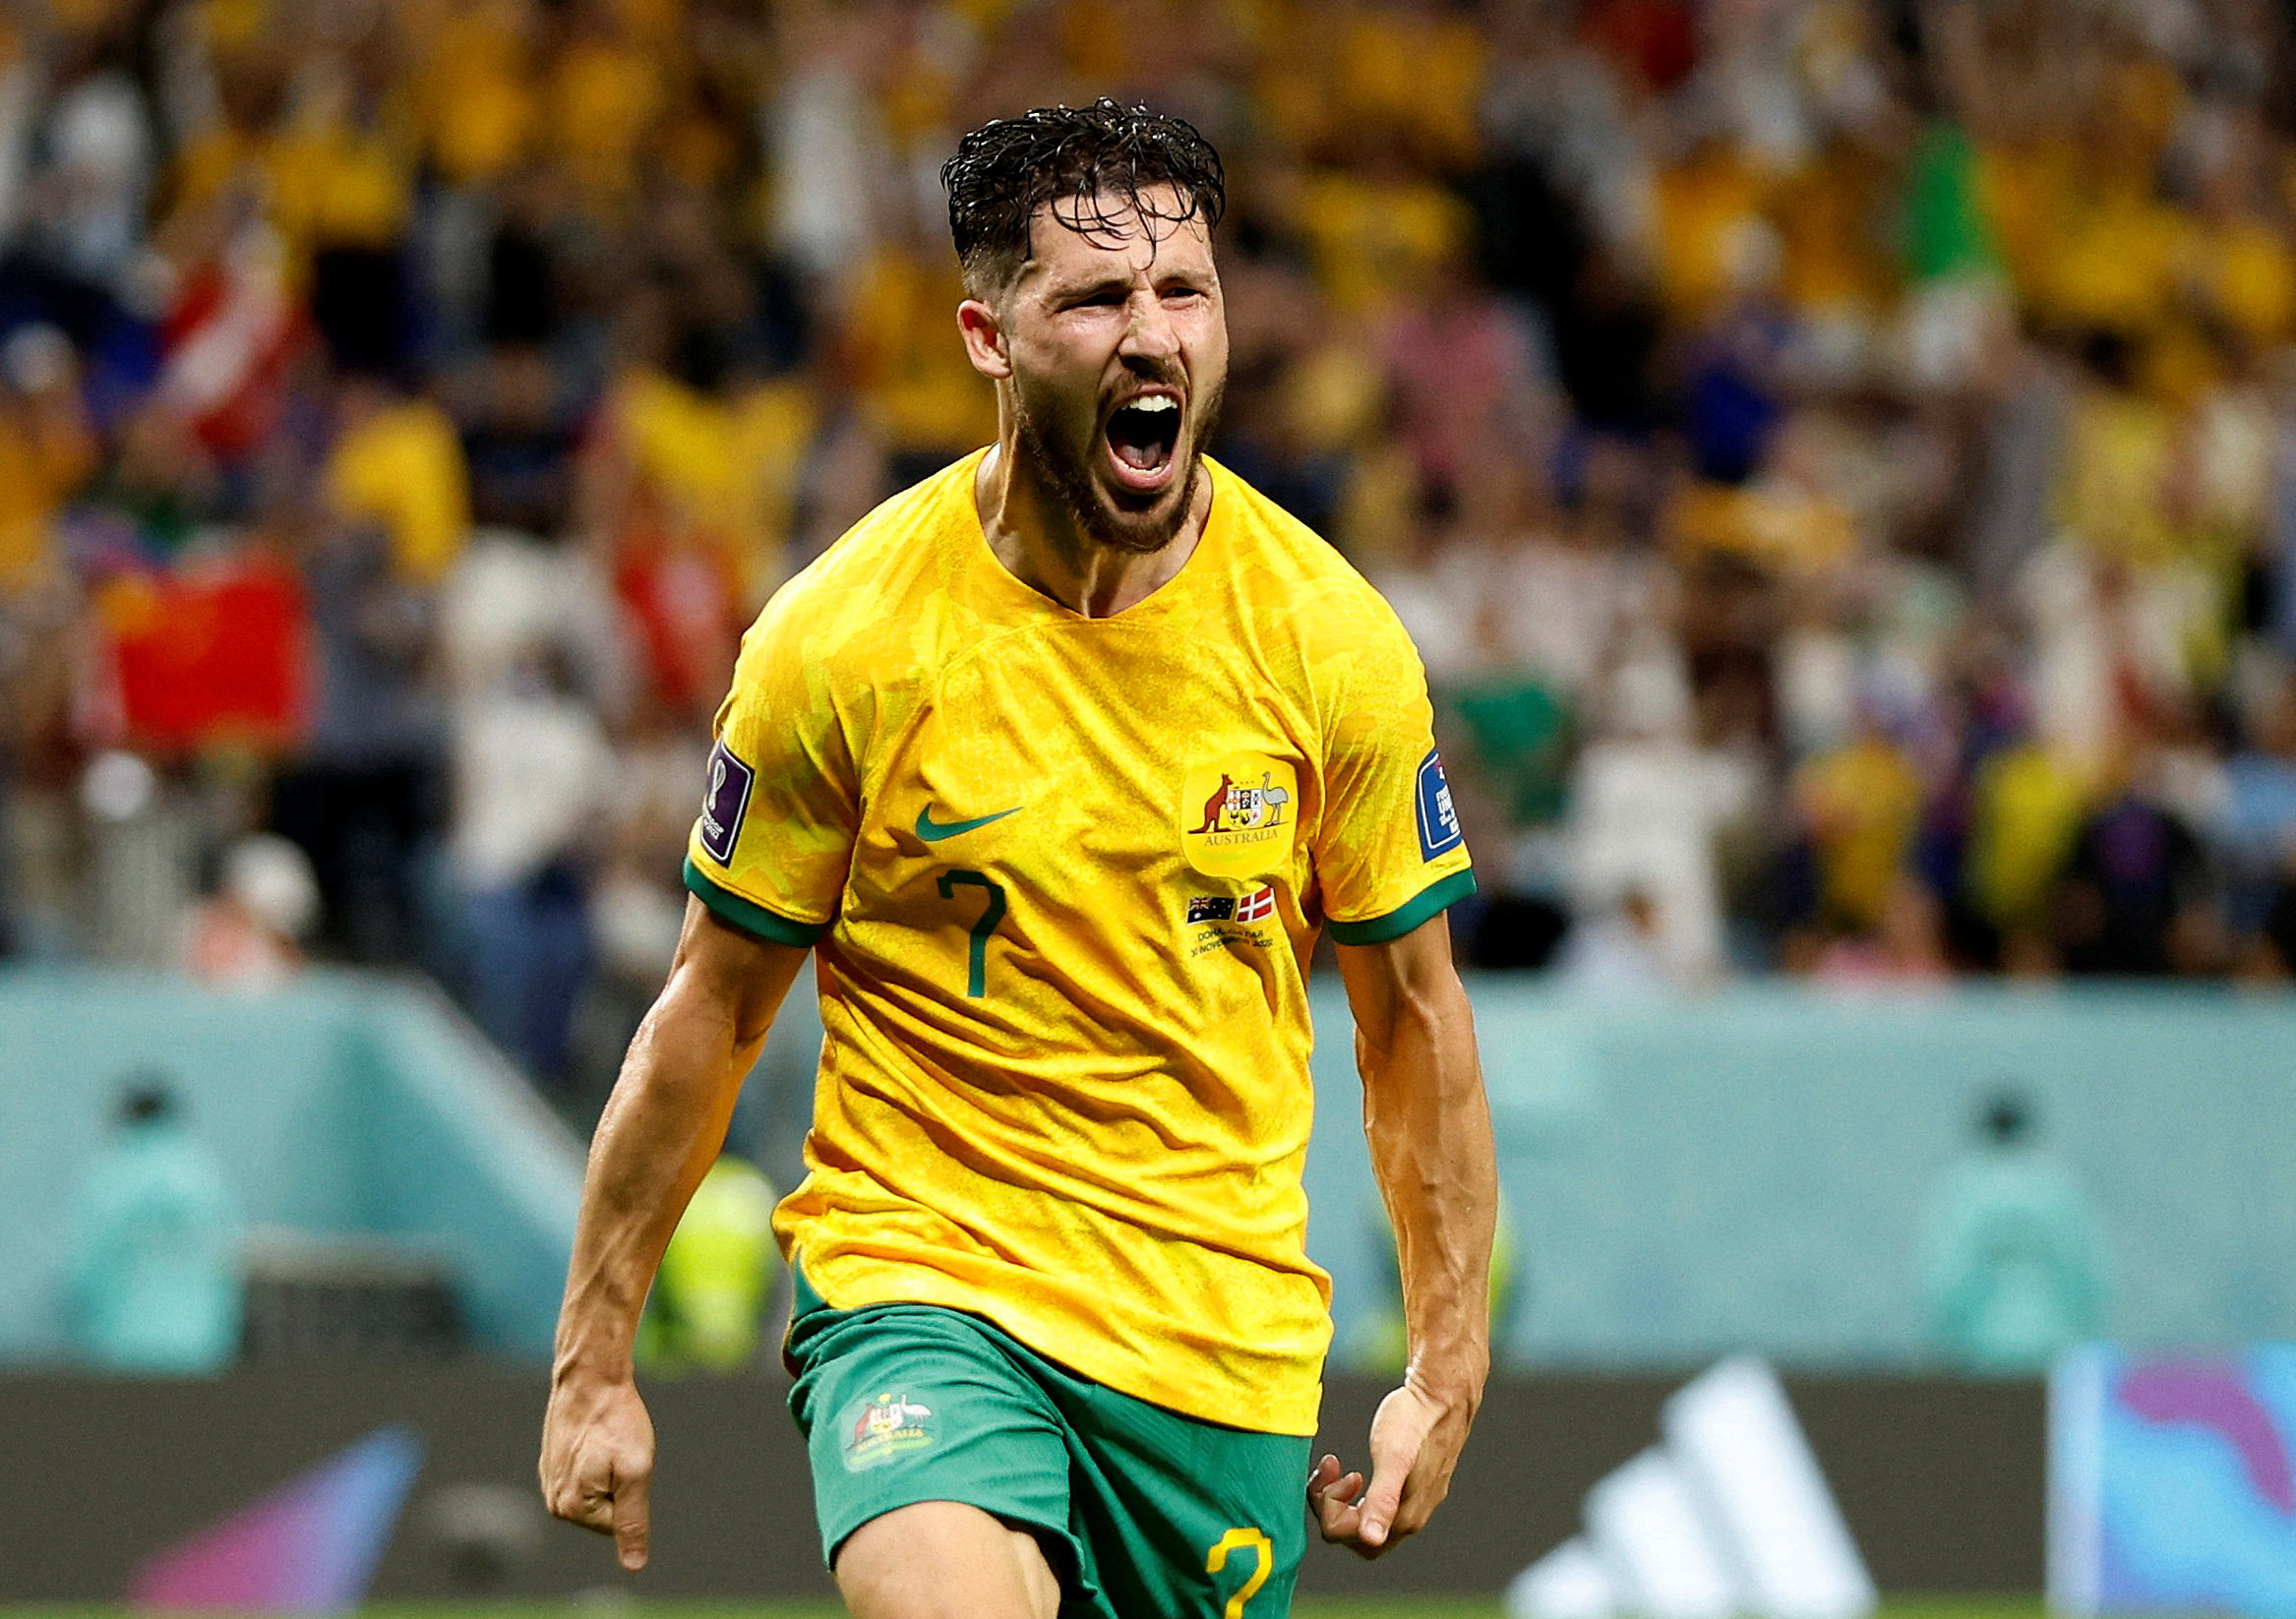 Australia’s Mathew Leckie celebrates scoring against Denmark at the World Cup in Qatar. Photo: Reuters